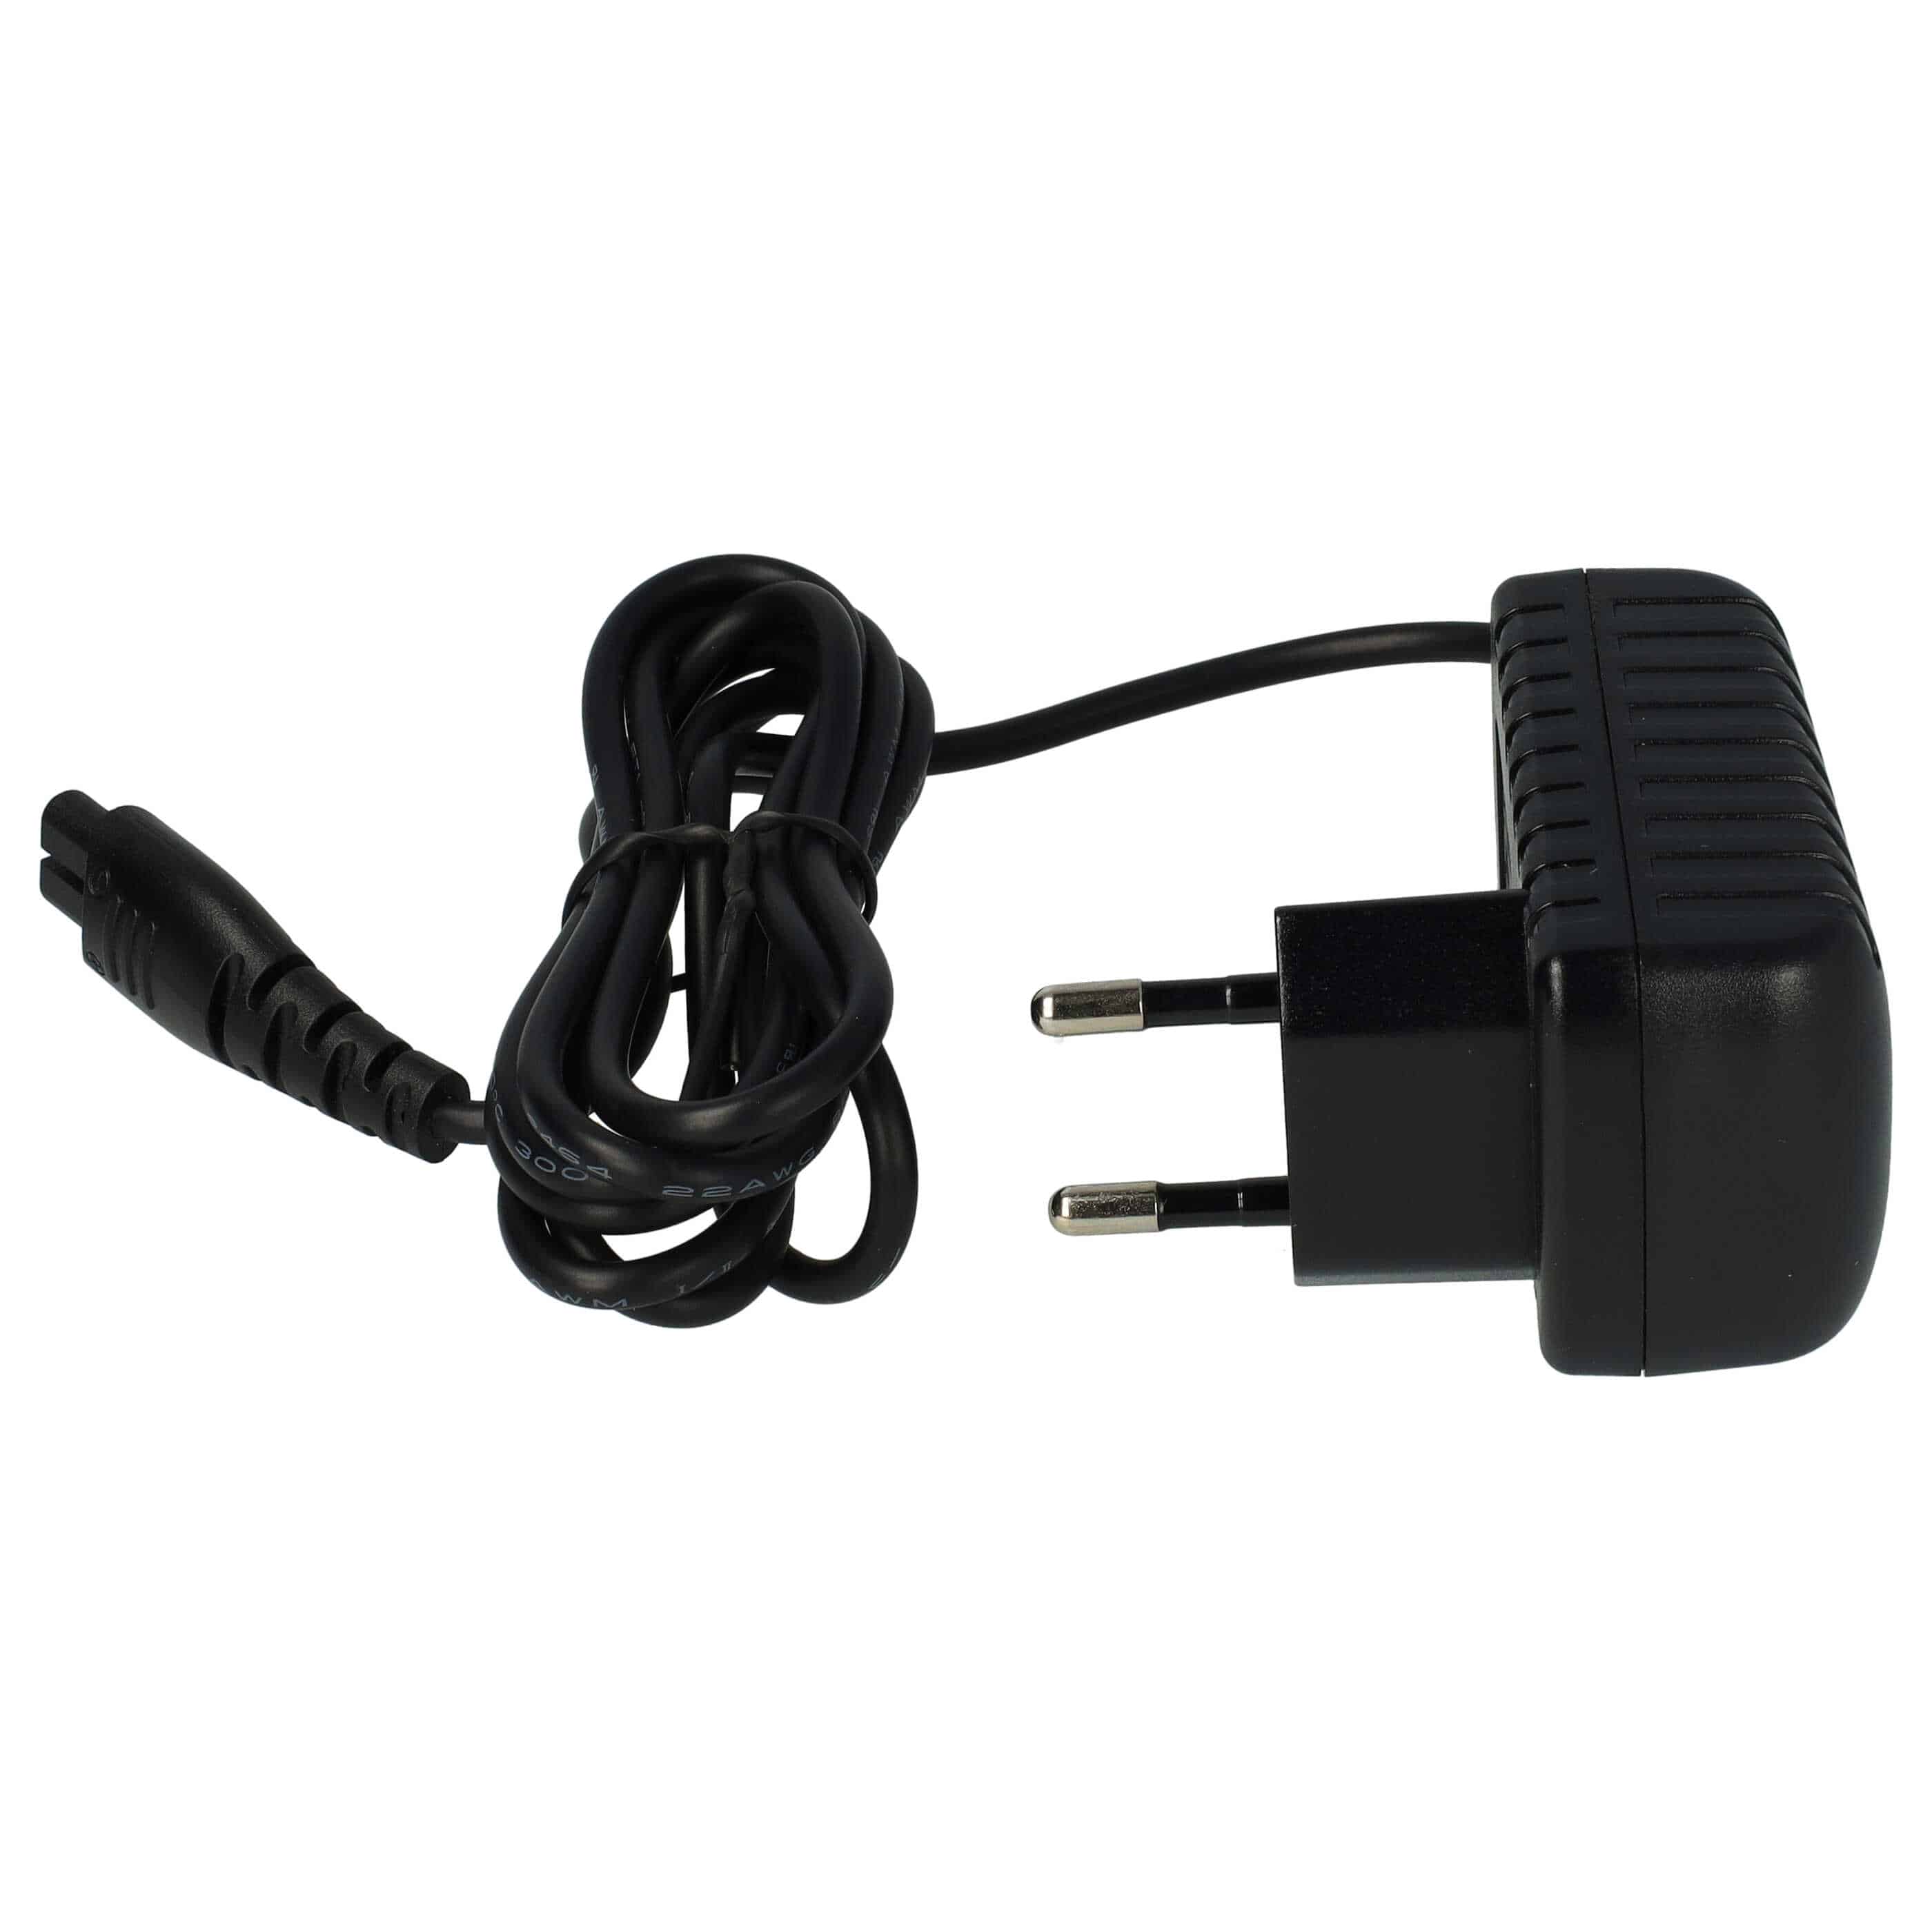 Mains Power Adapter replaces Rowenta 1800134268 for Rowenta Electric Hair Trimmer - 200 cm